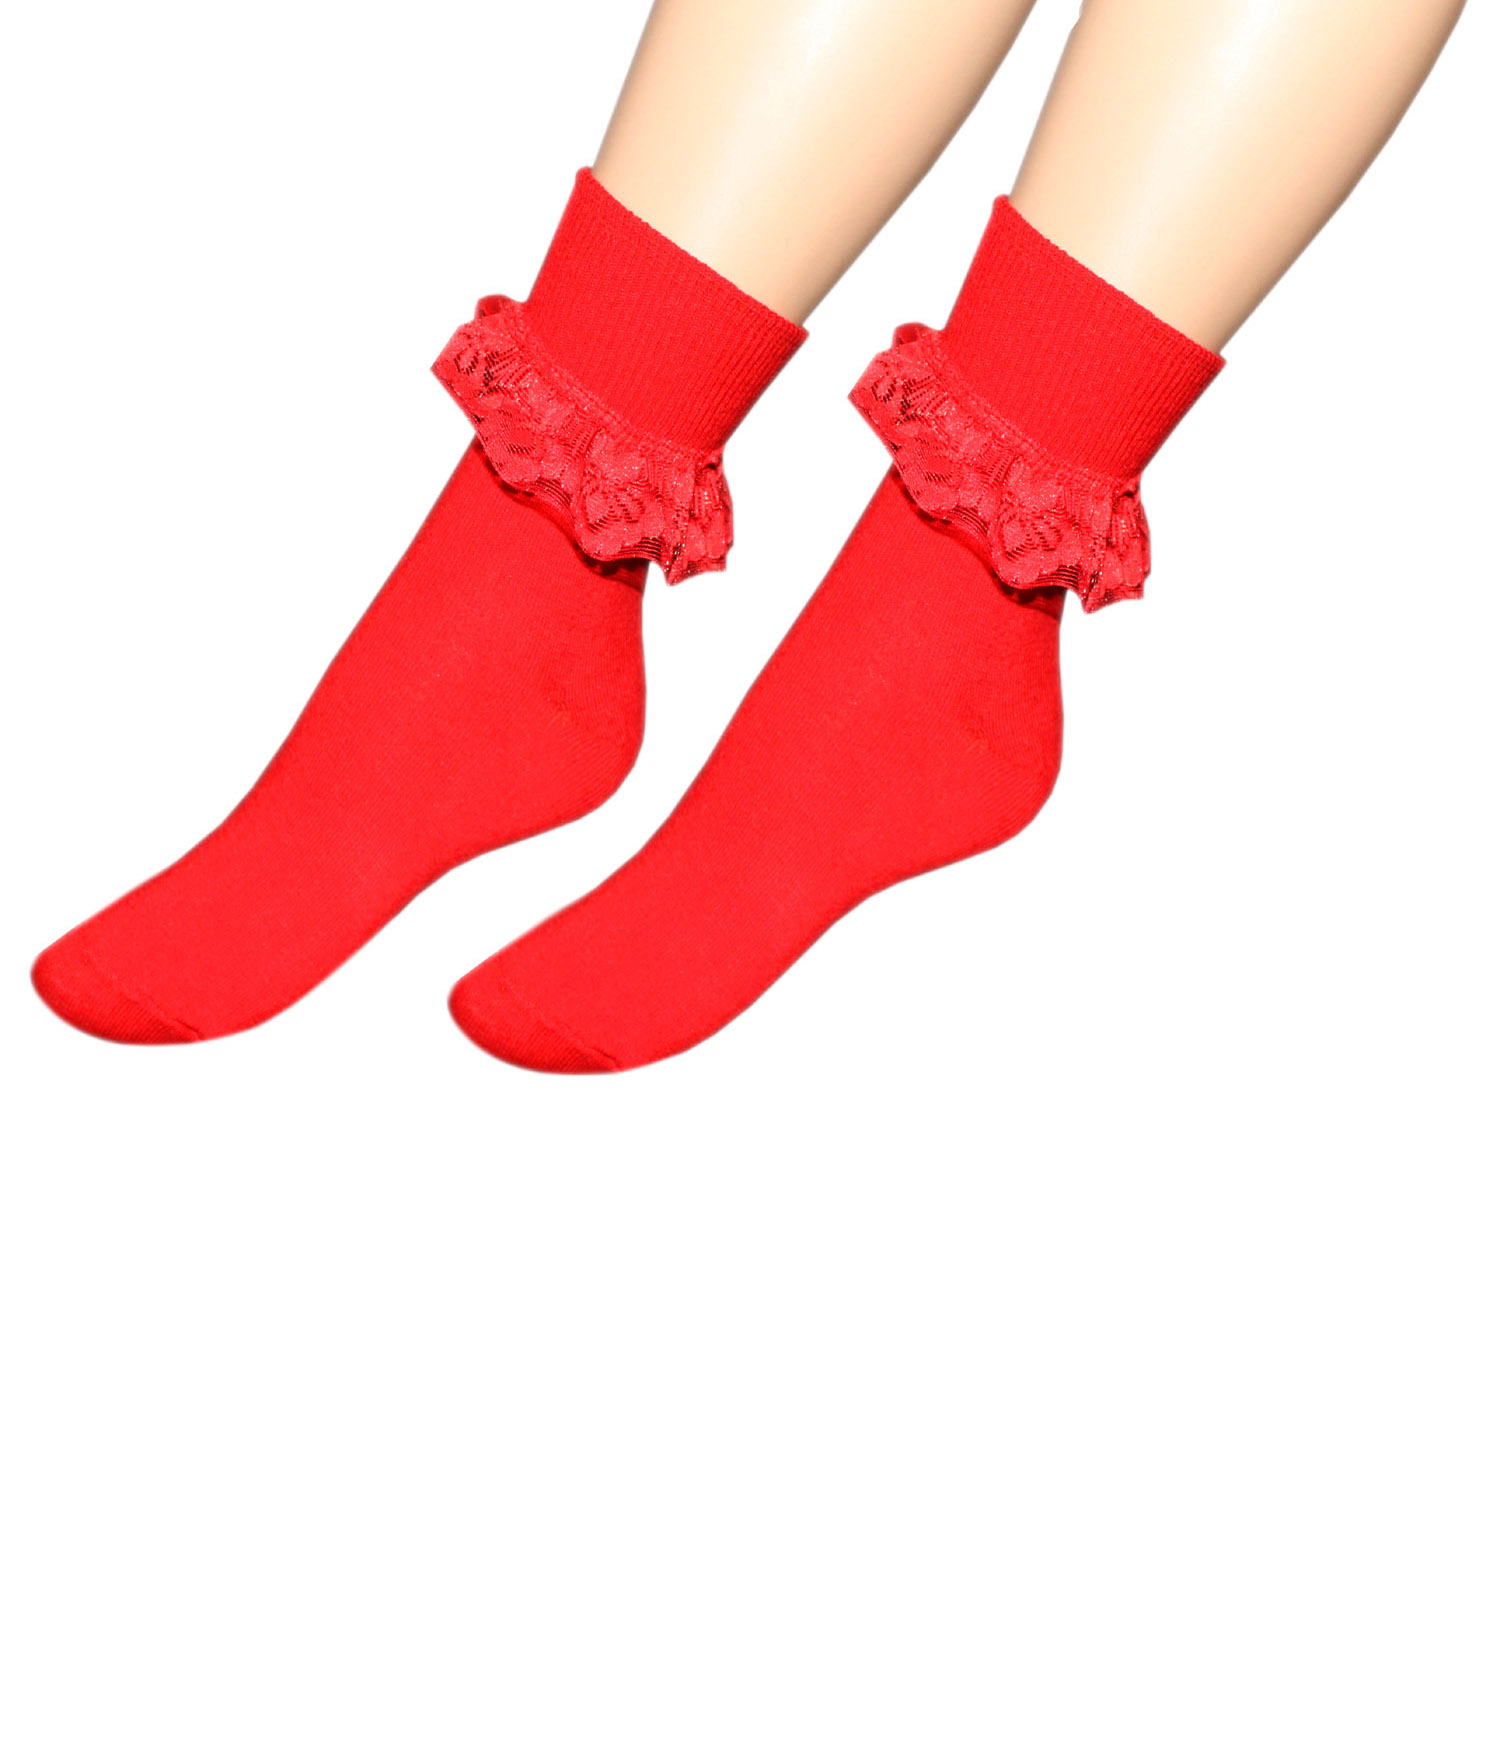 Crazy Chick Red Ankle Lace Socks(12 Pairs)